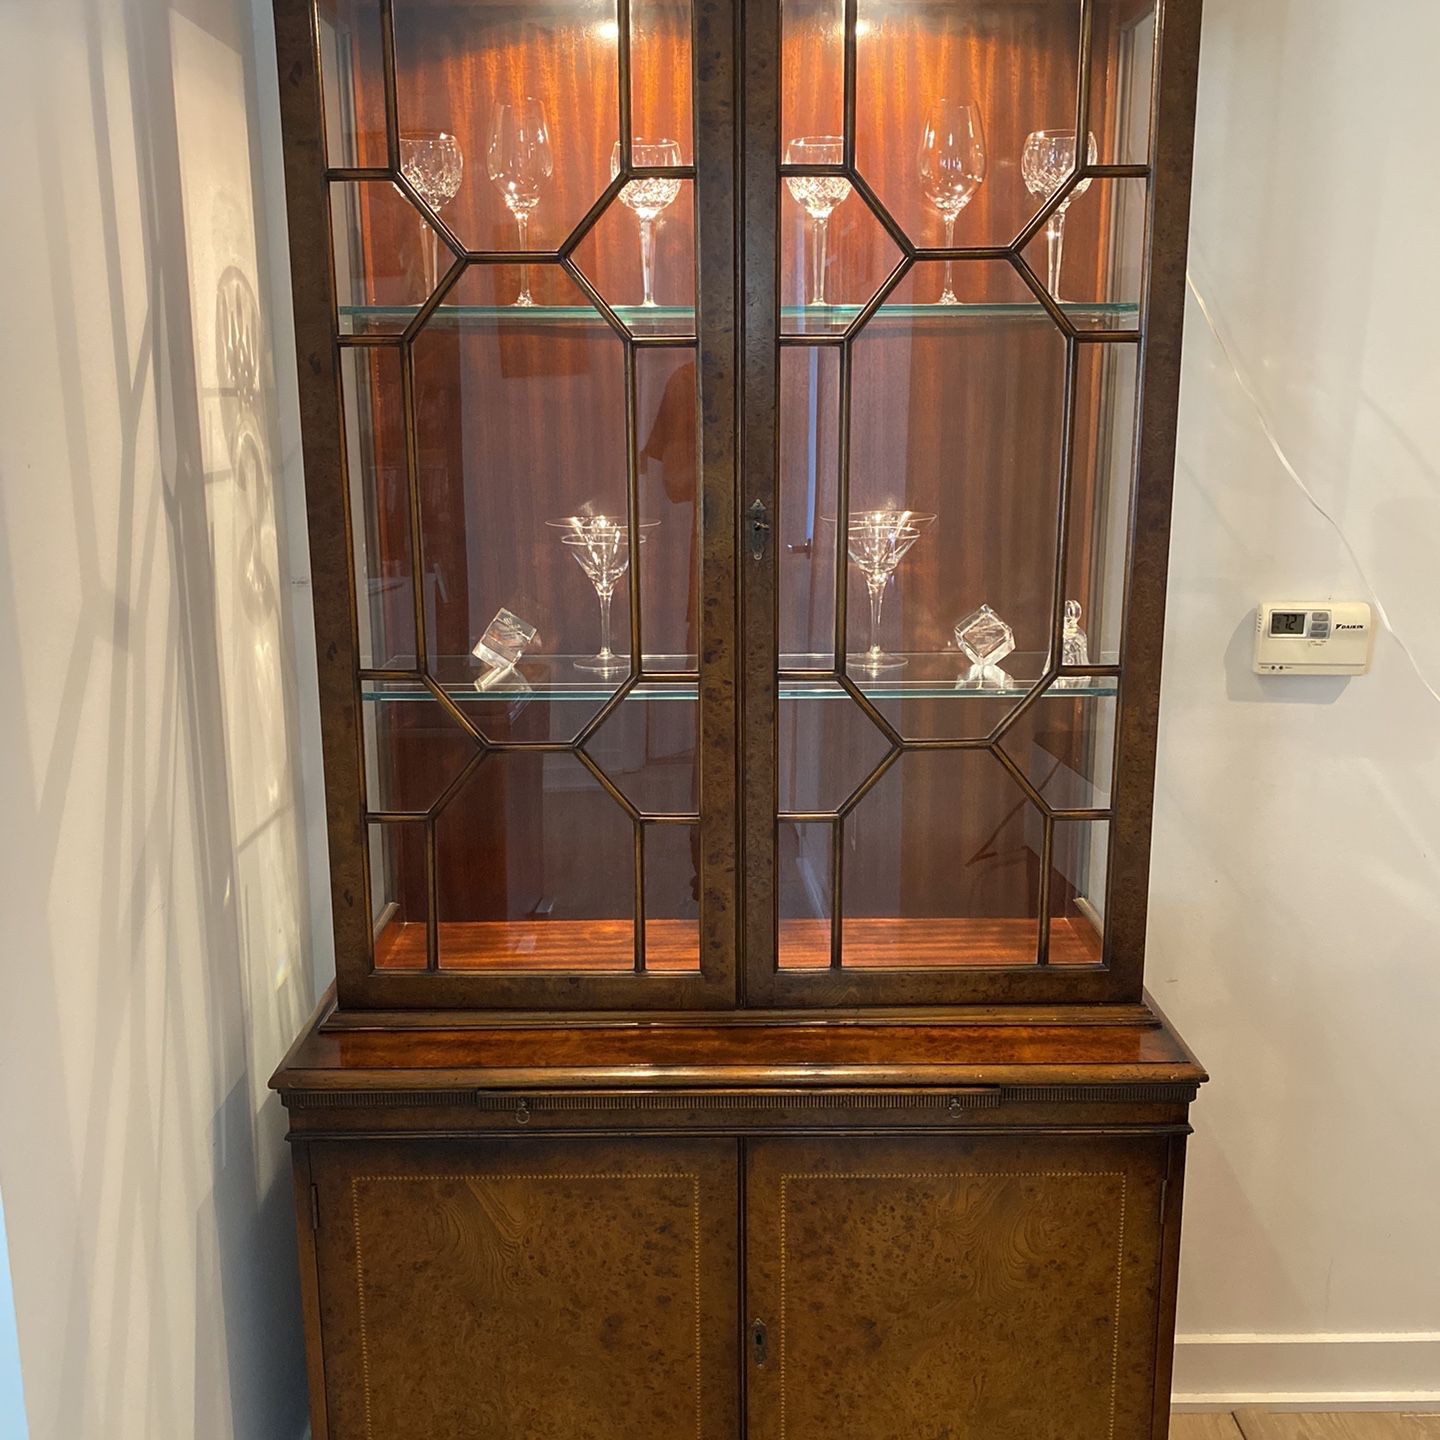 Kellogg Collection Cabinet